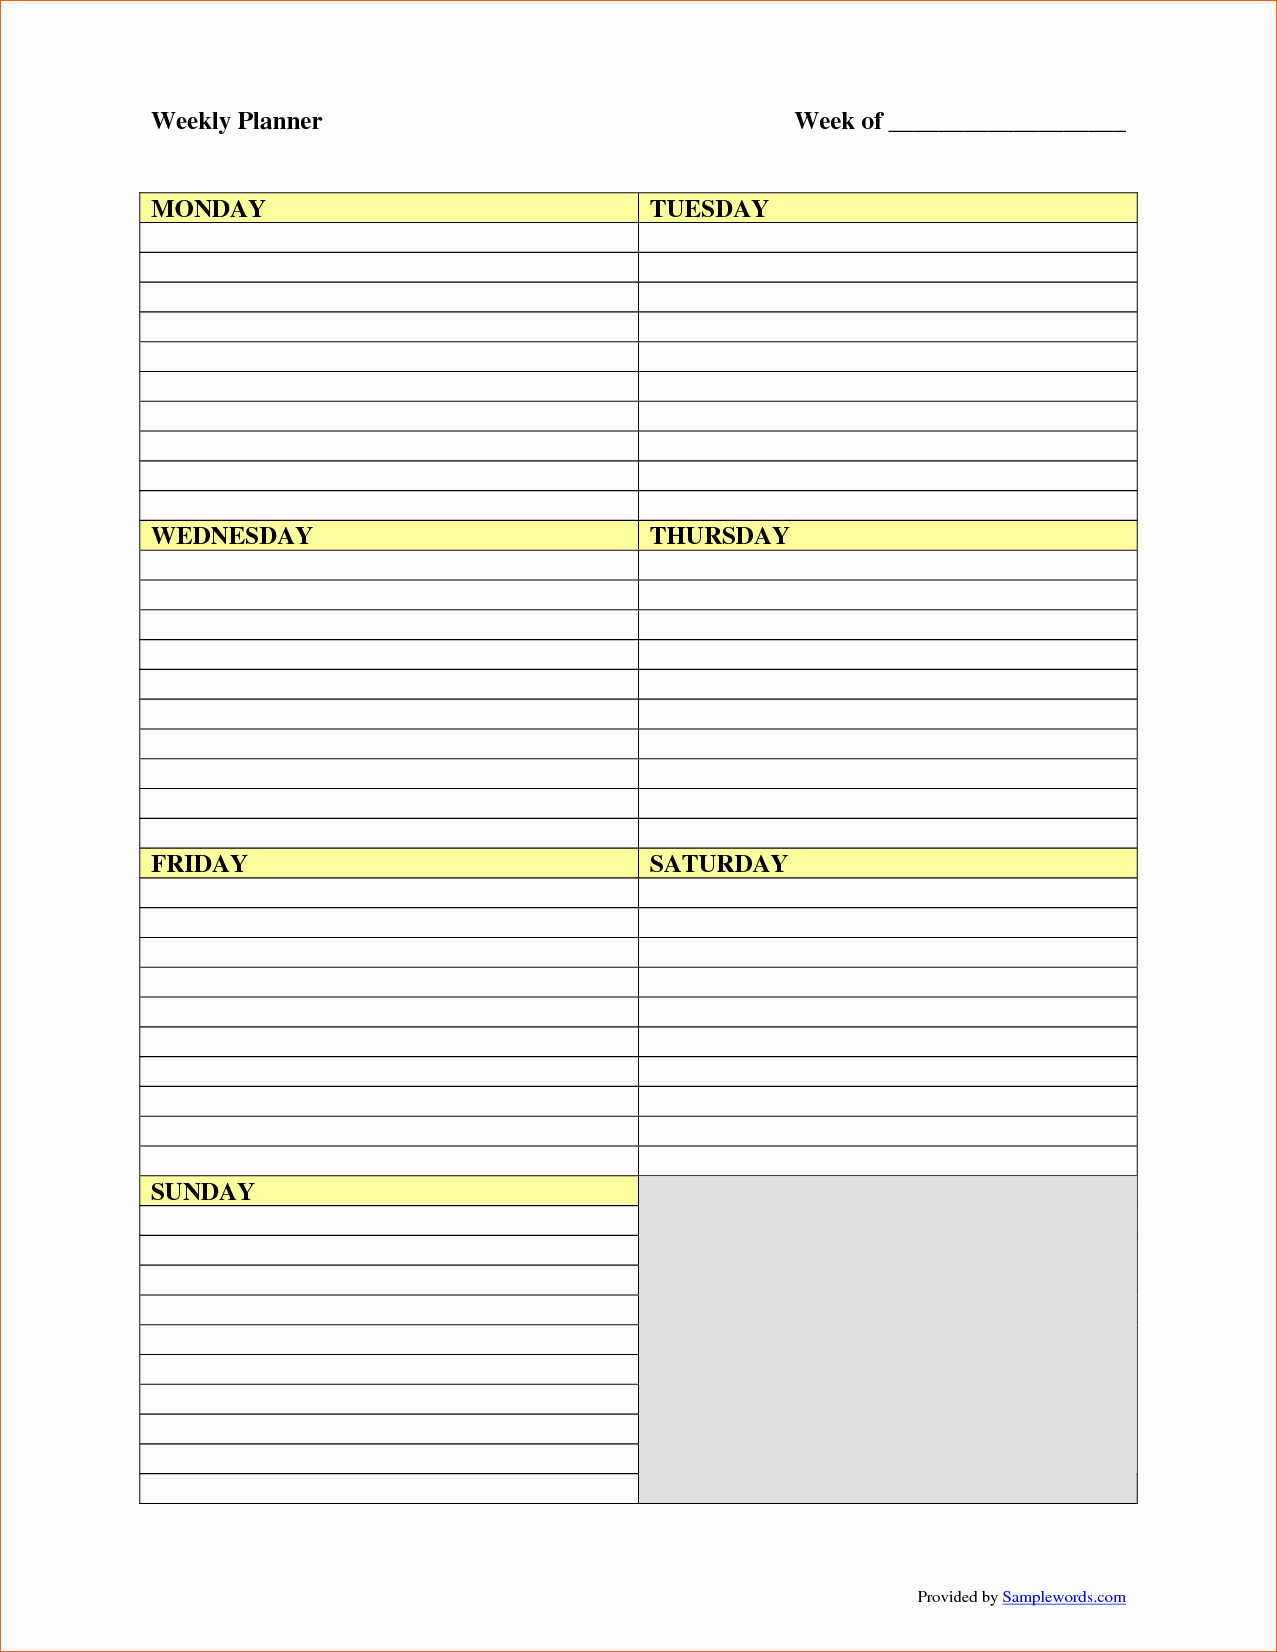 Daily Weekly Monthly Planner Template Lovely 7 Free Weekly Planner Template